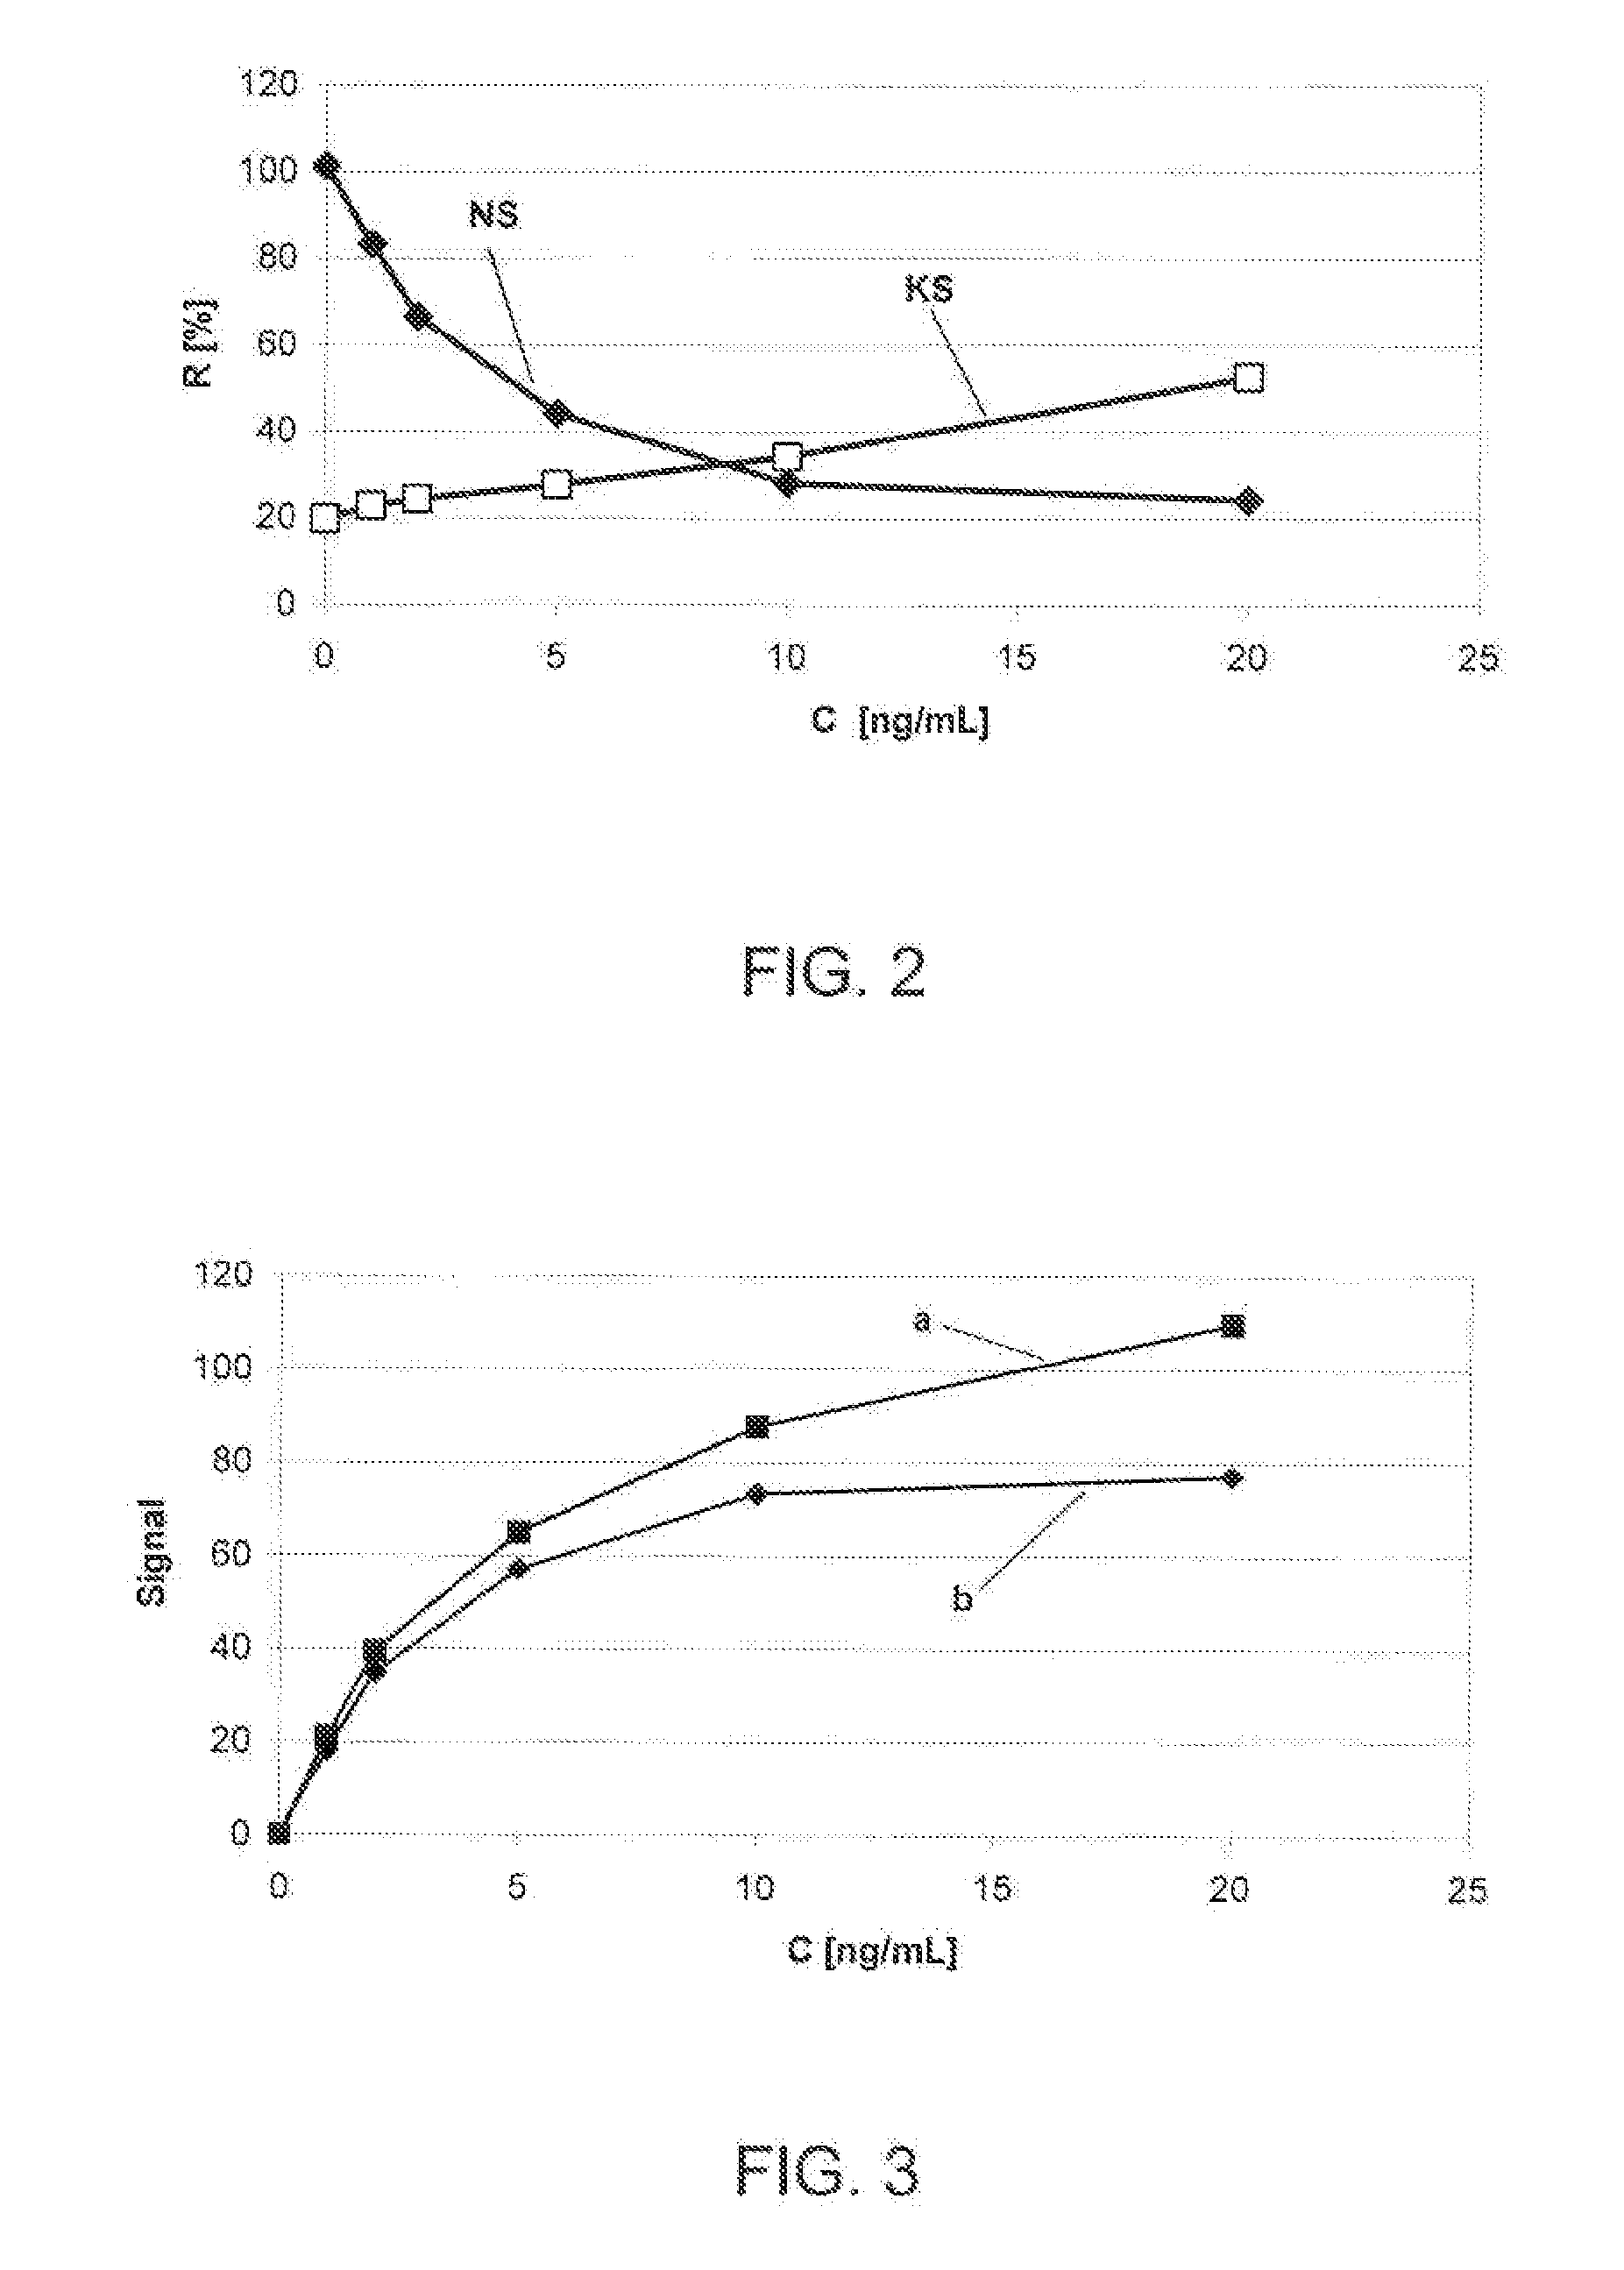 Method for Increasing the Dynamic Measuring Range of Test Elements Based on Specific Binding Reactions